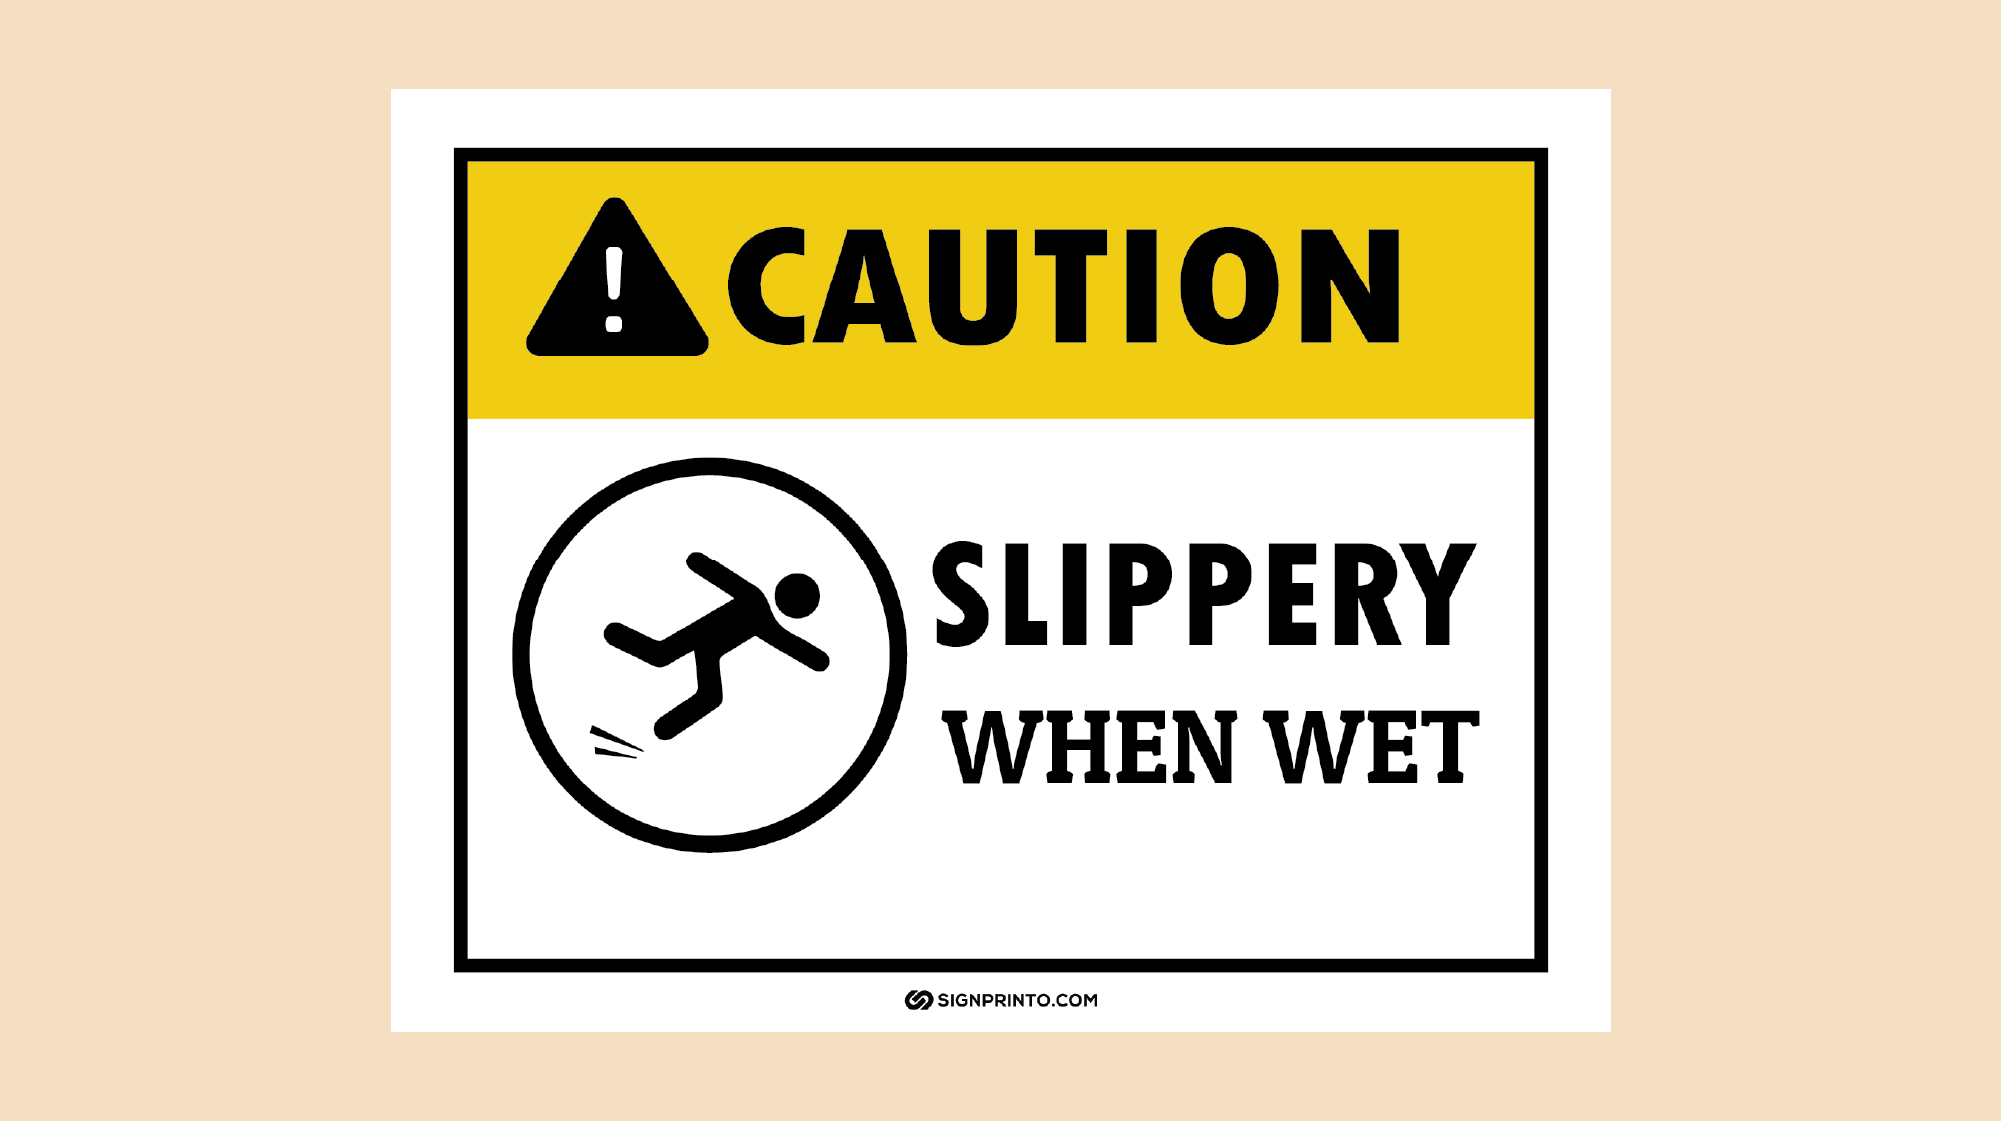 FREE Download: Printable Slippery When Wet Sign PDF